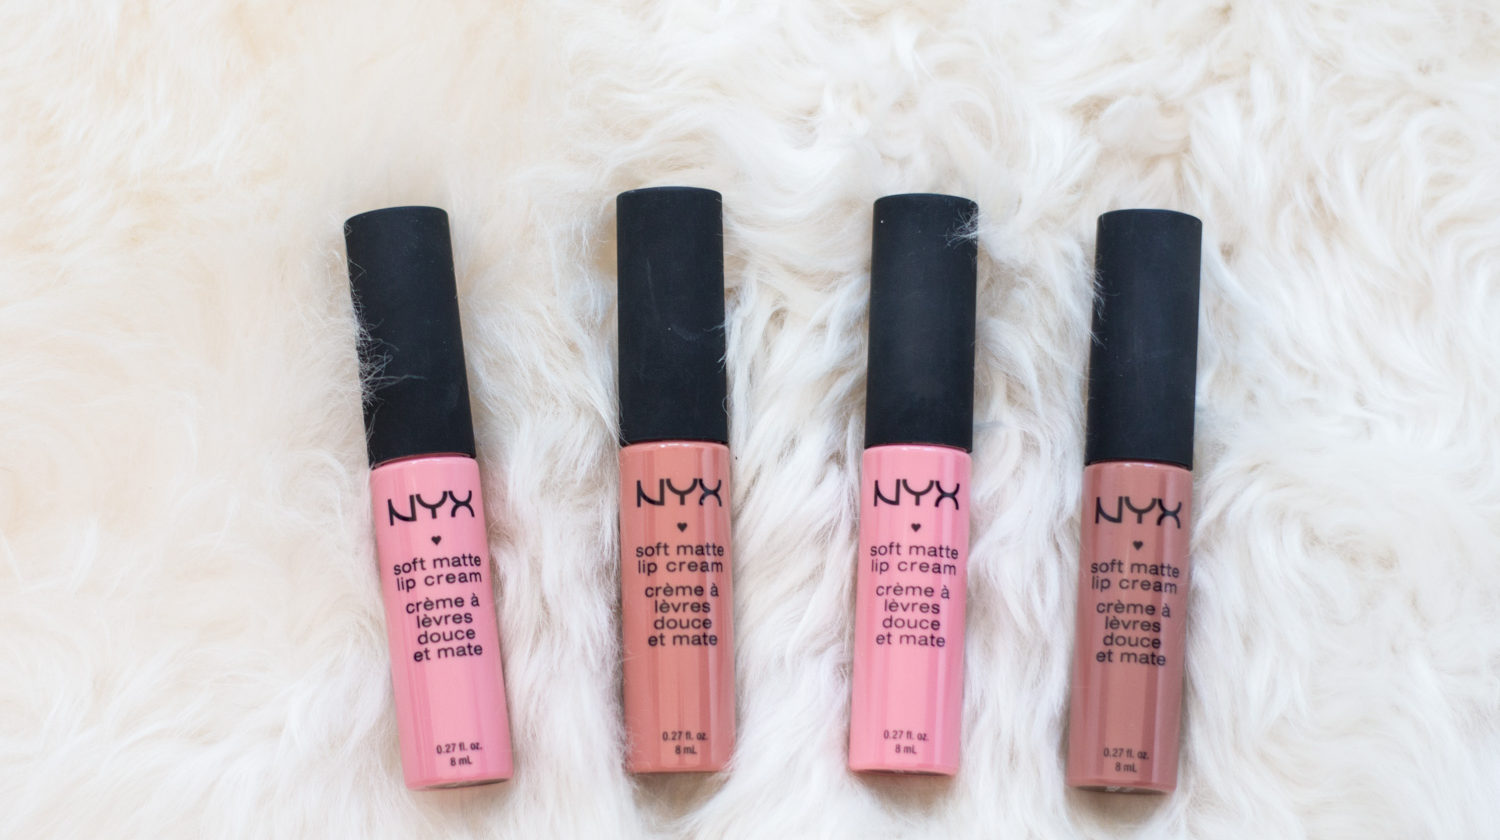 Nyx Soft Matte Lip Cream Swatches & Review